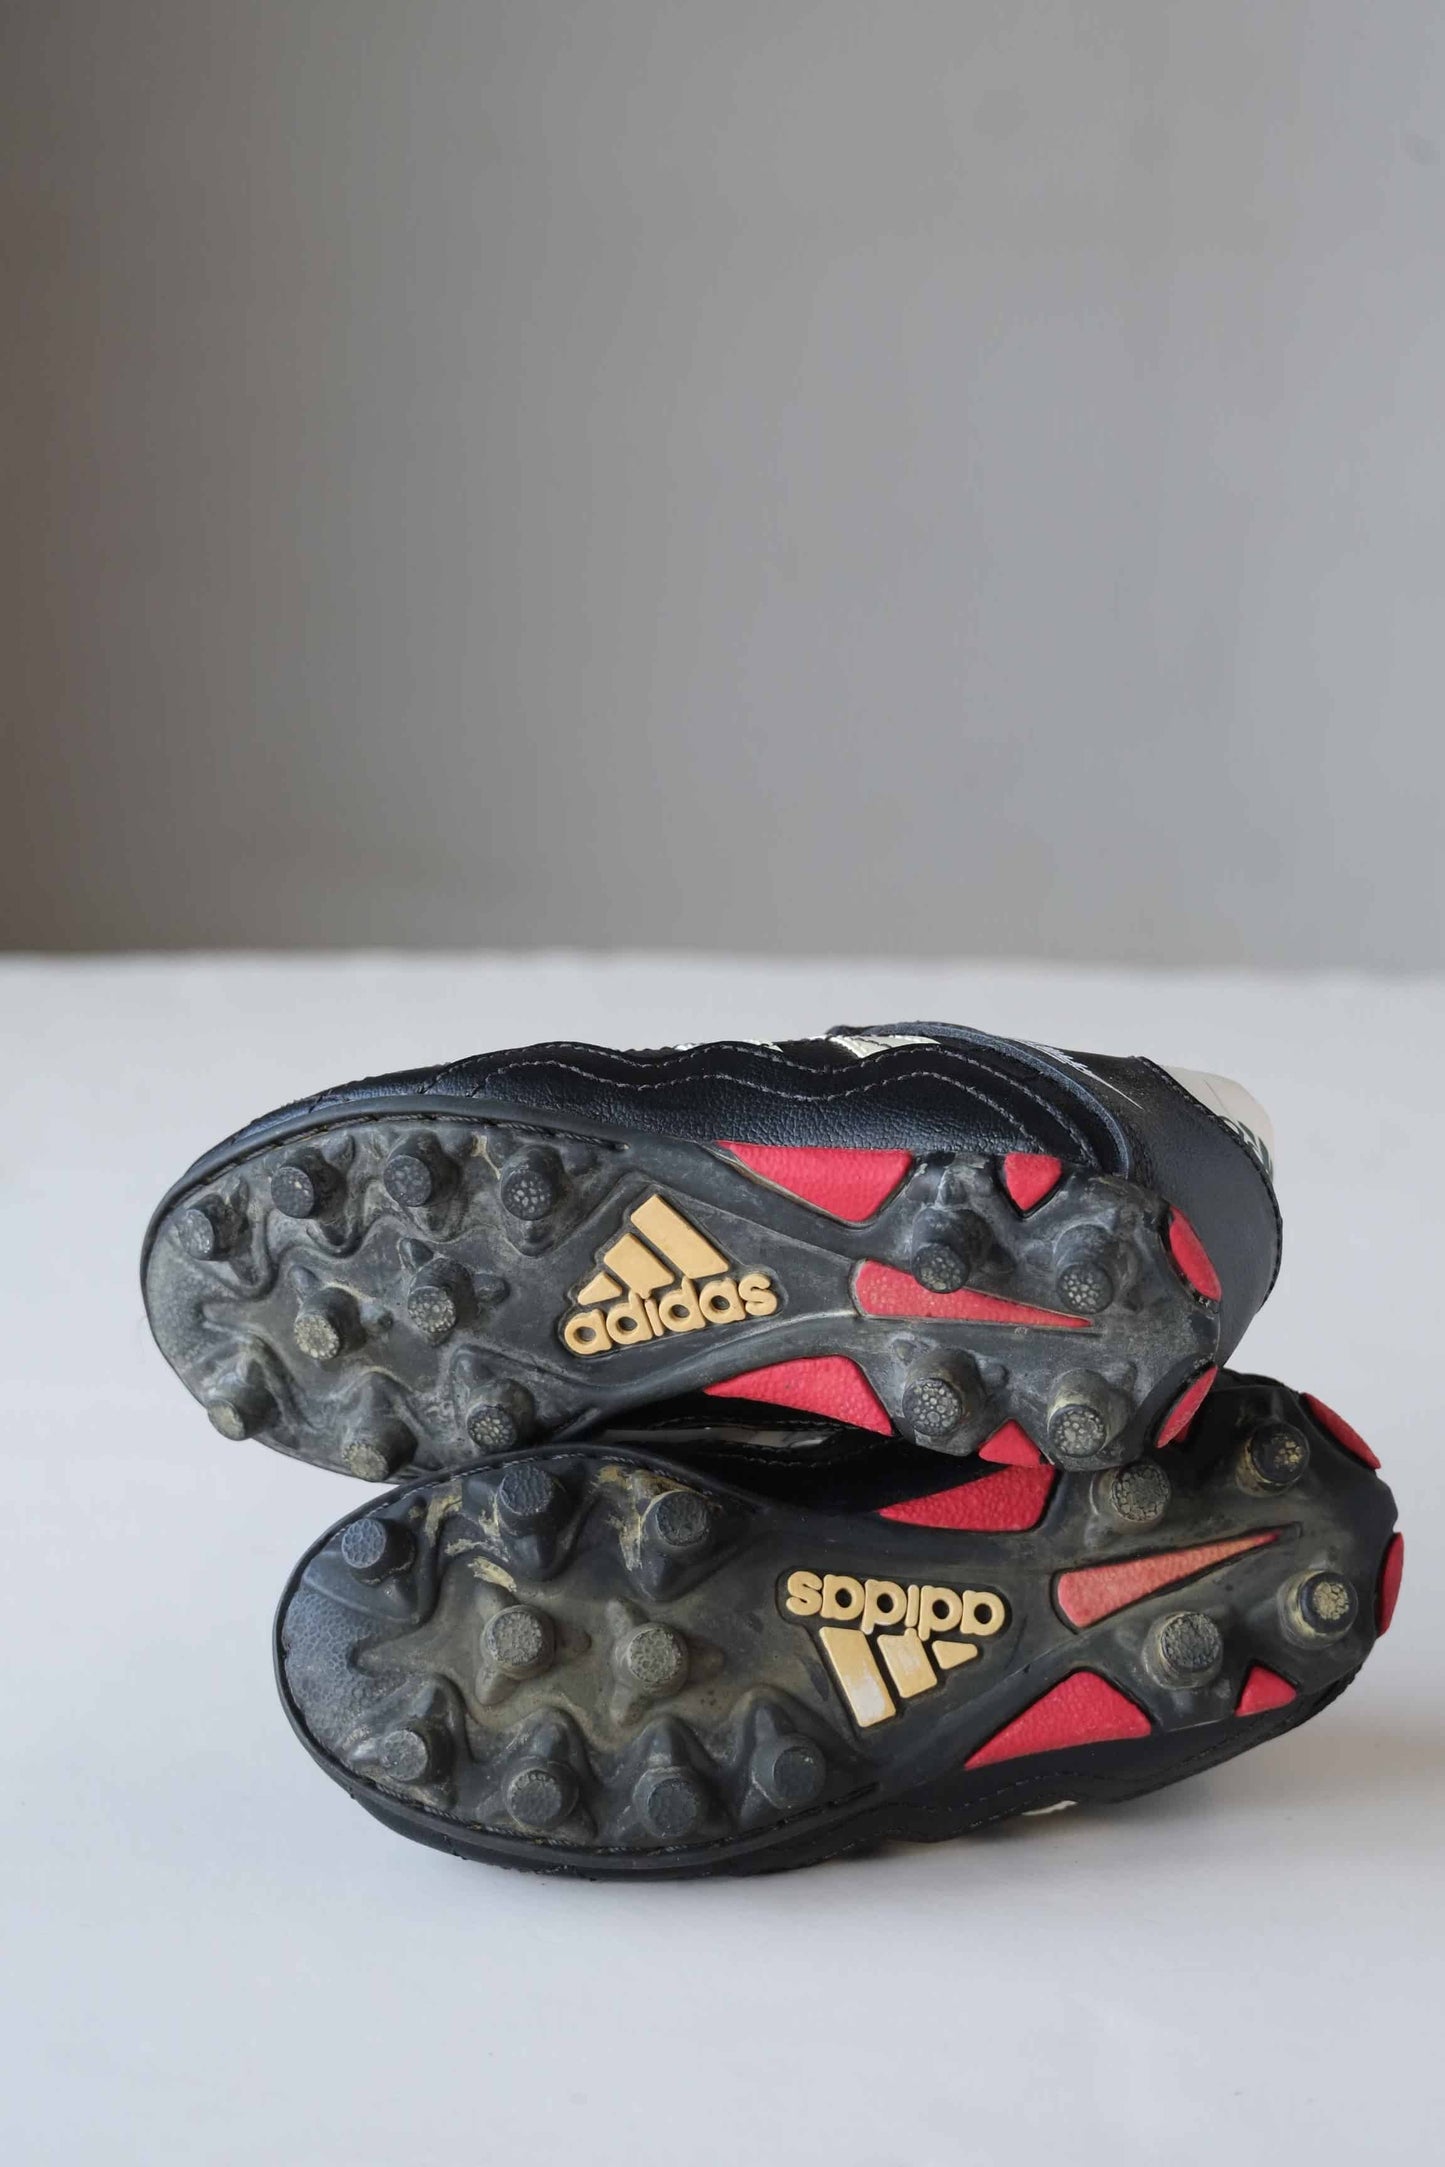  ADIDAS Desailly Liga Soccer Shoes soles